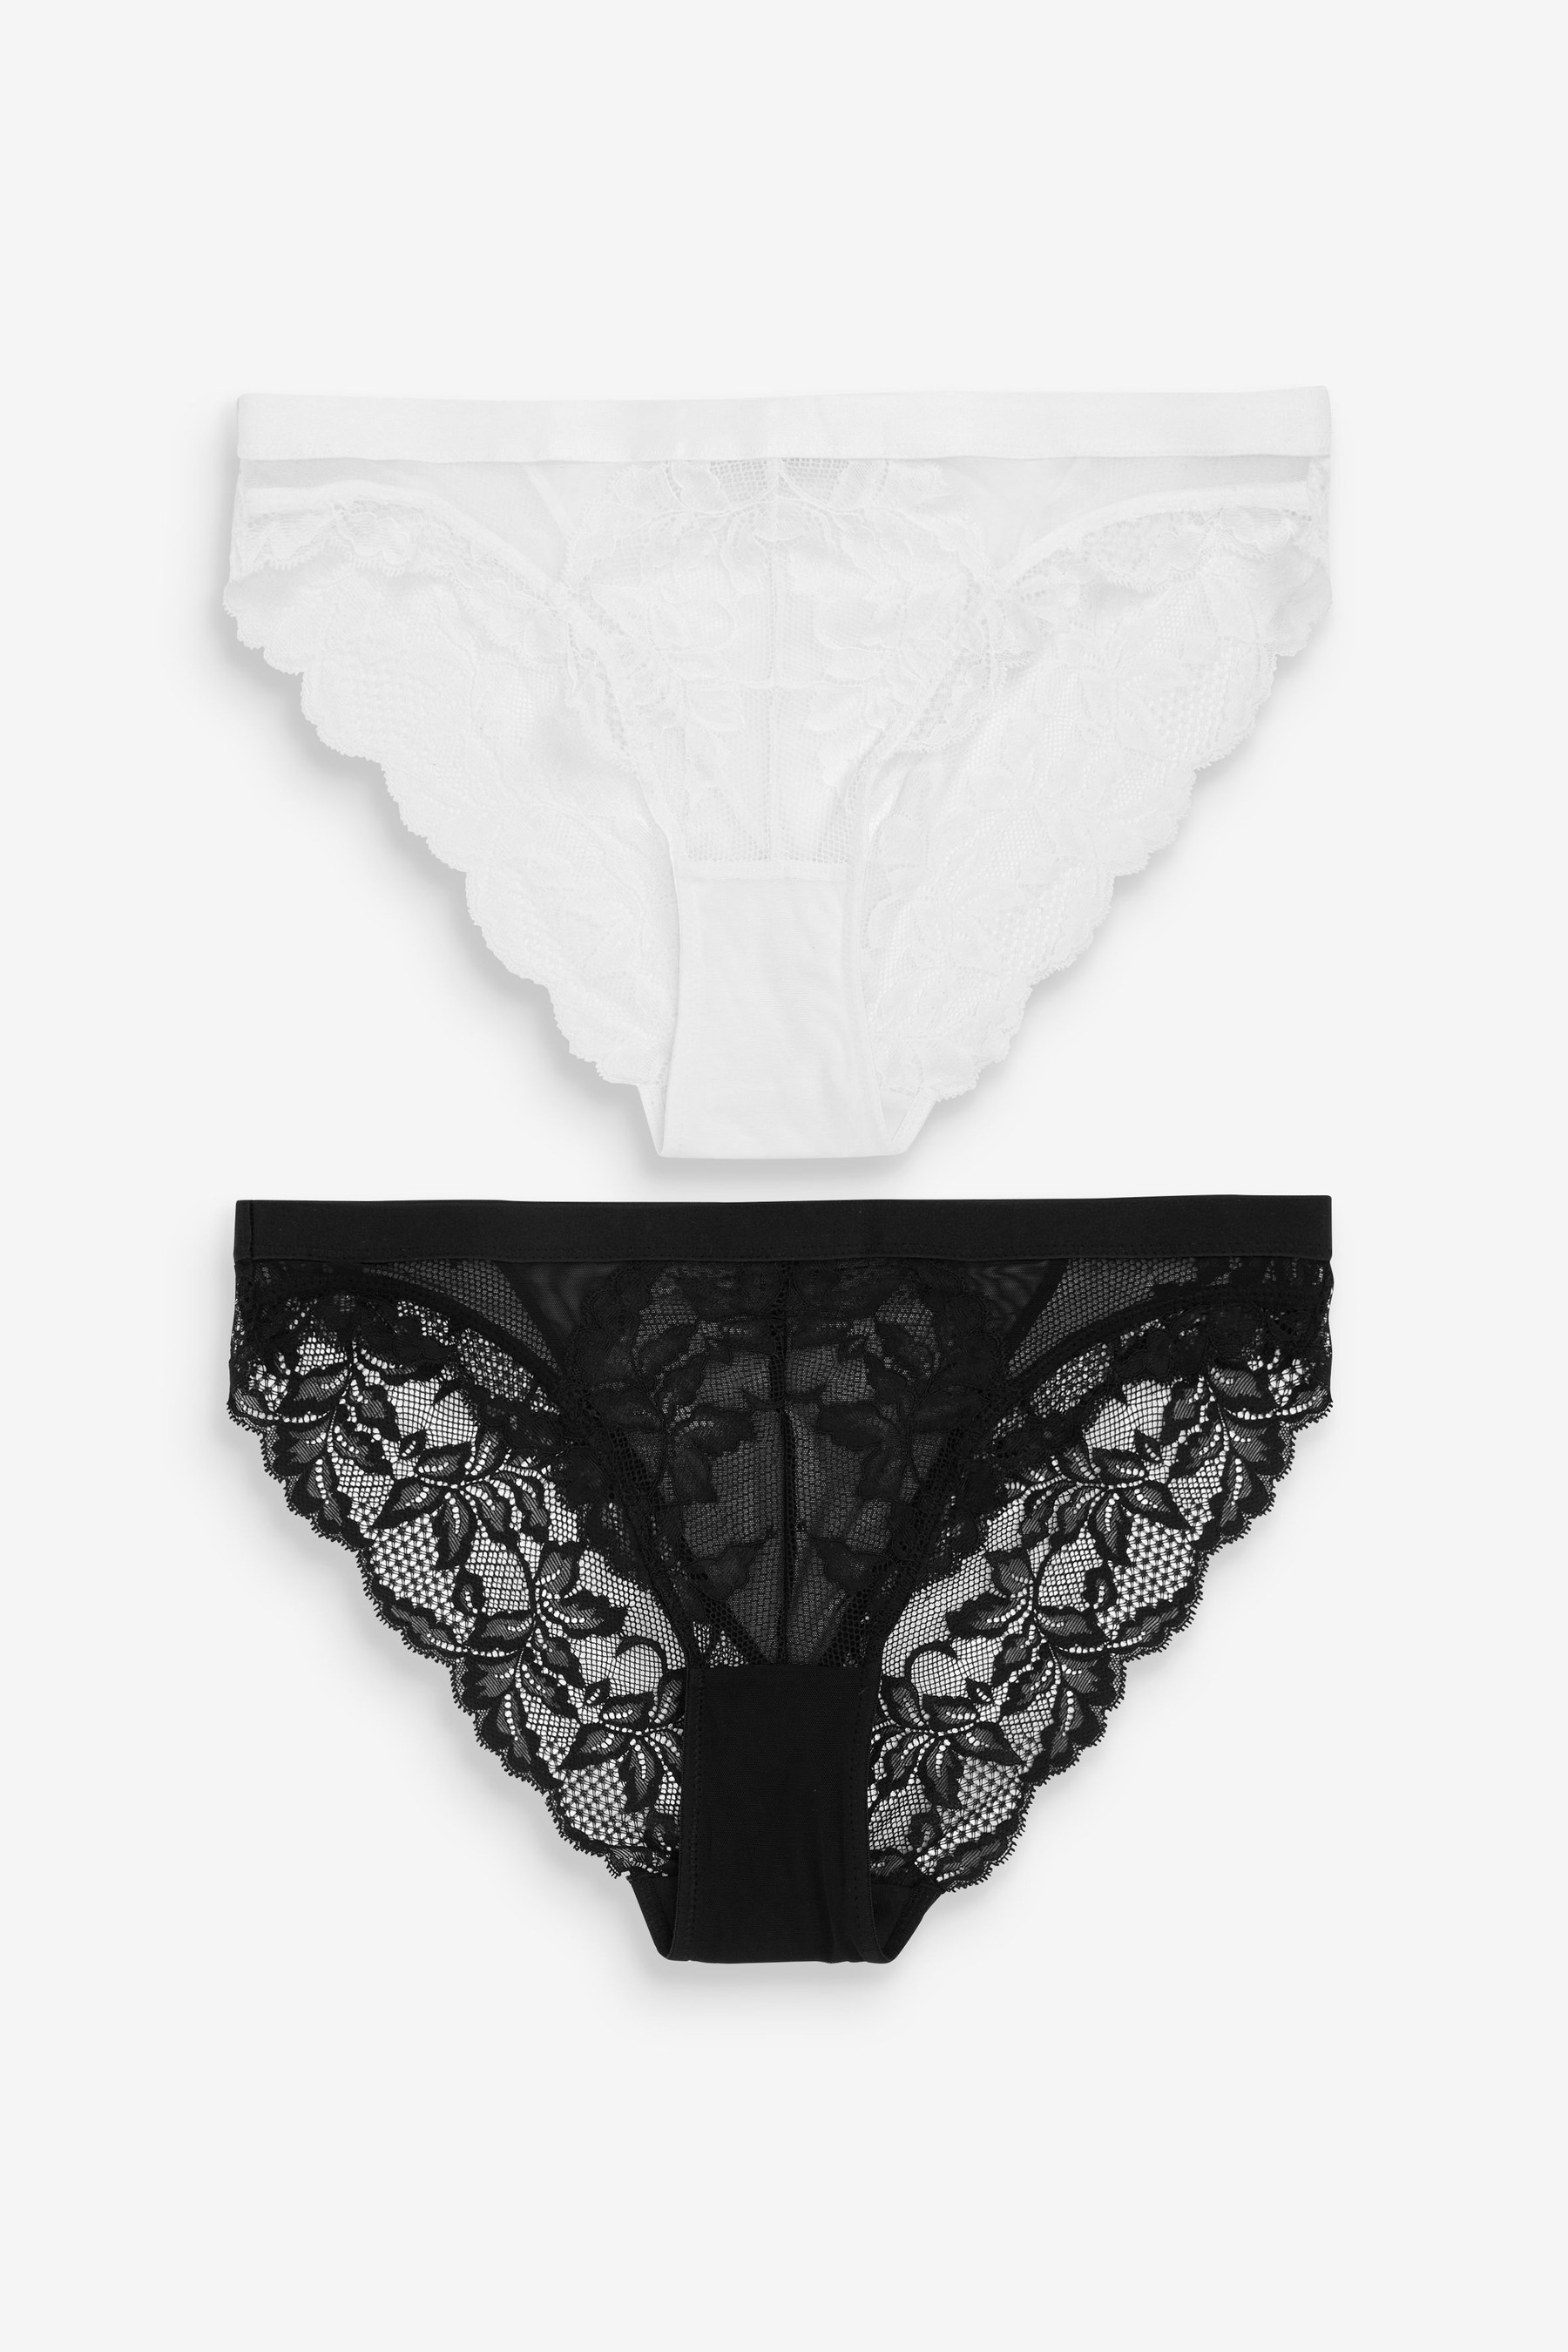 Lace Knickers 2 Pack High Leg